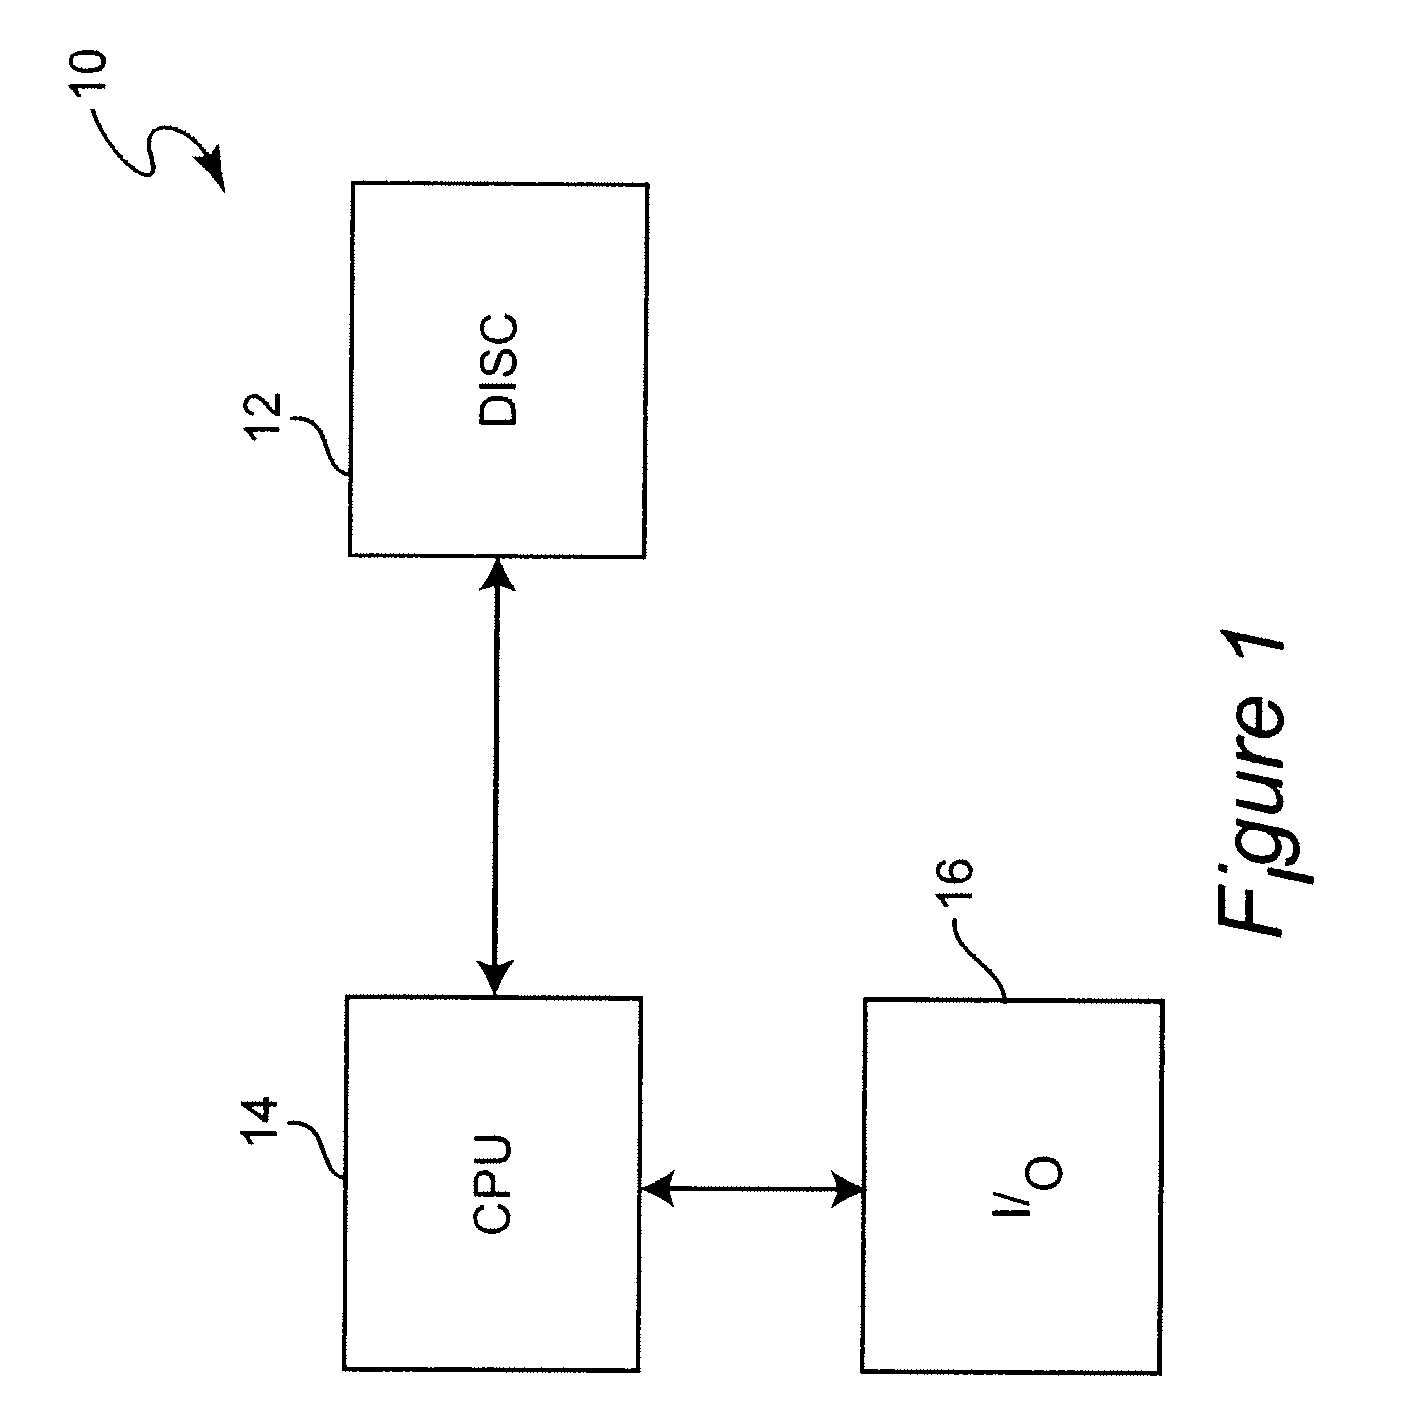 Method and System for Characterizing Unknown Annotator and its Type System with Respect to Reference Annotation Types and Associated Reference Taxonomy Nodes